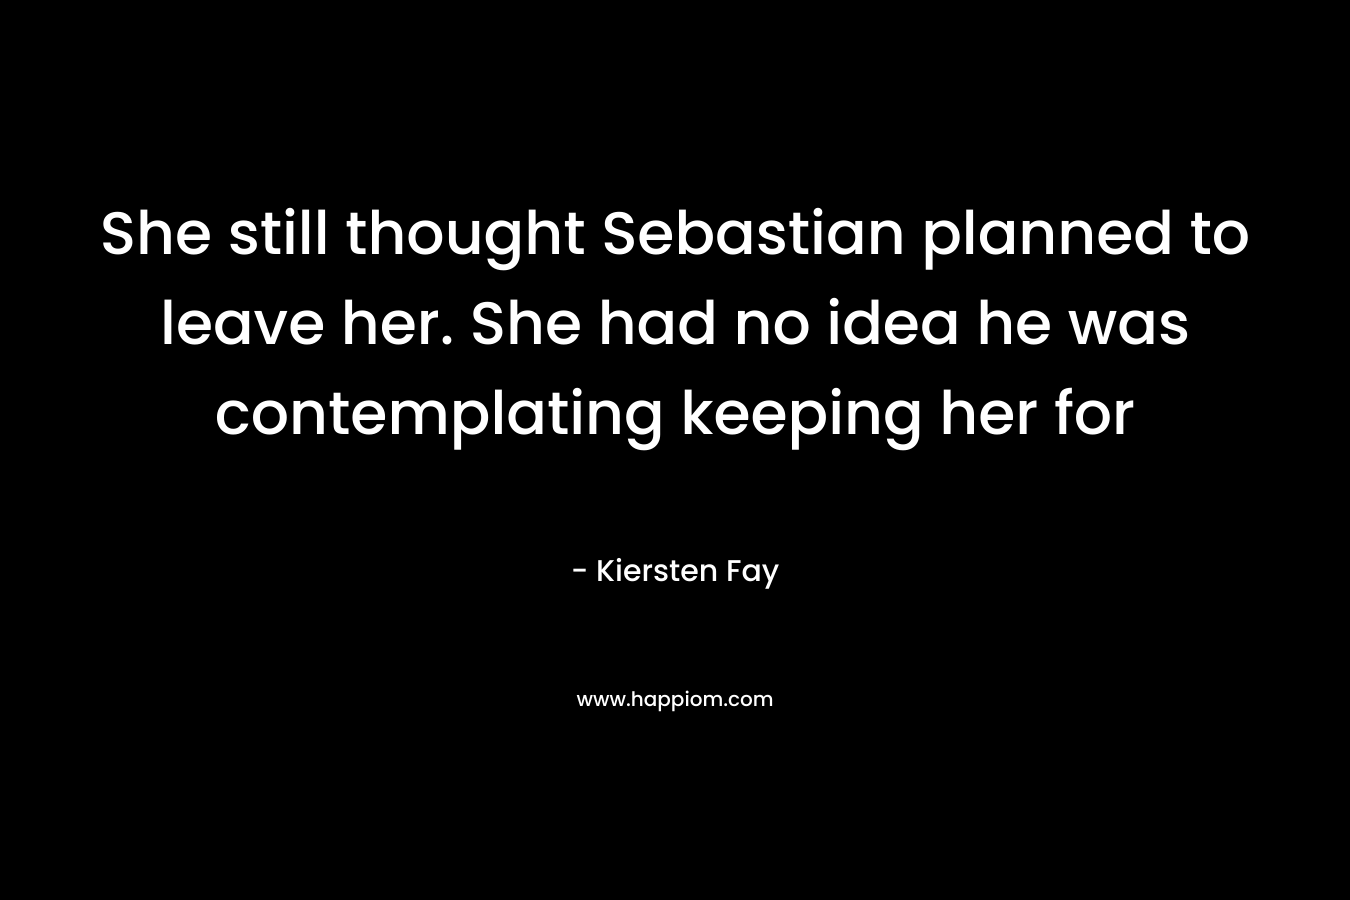 She still thought Sebastian planned to leave her. She had no idea he was contemplating keeping her for – Kiersten Fay